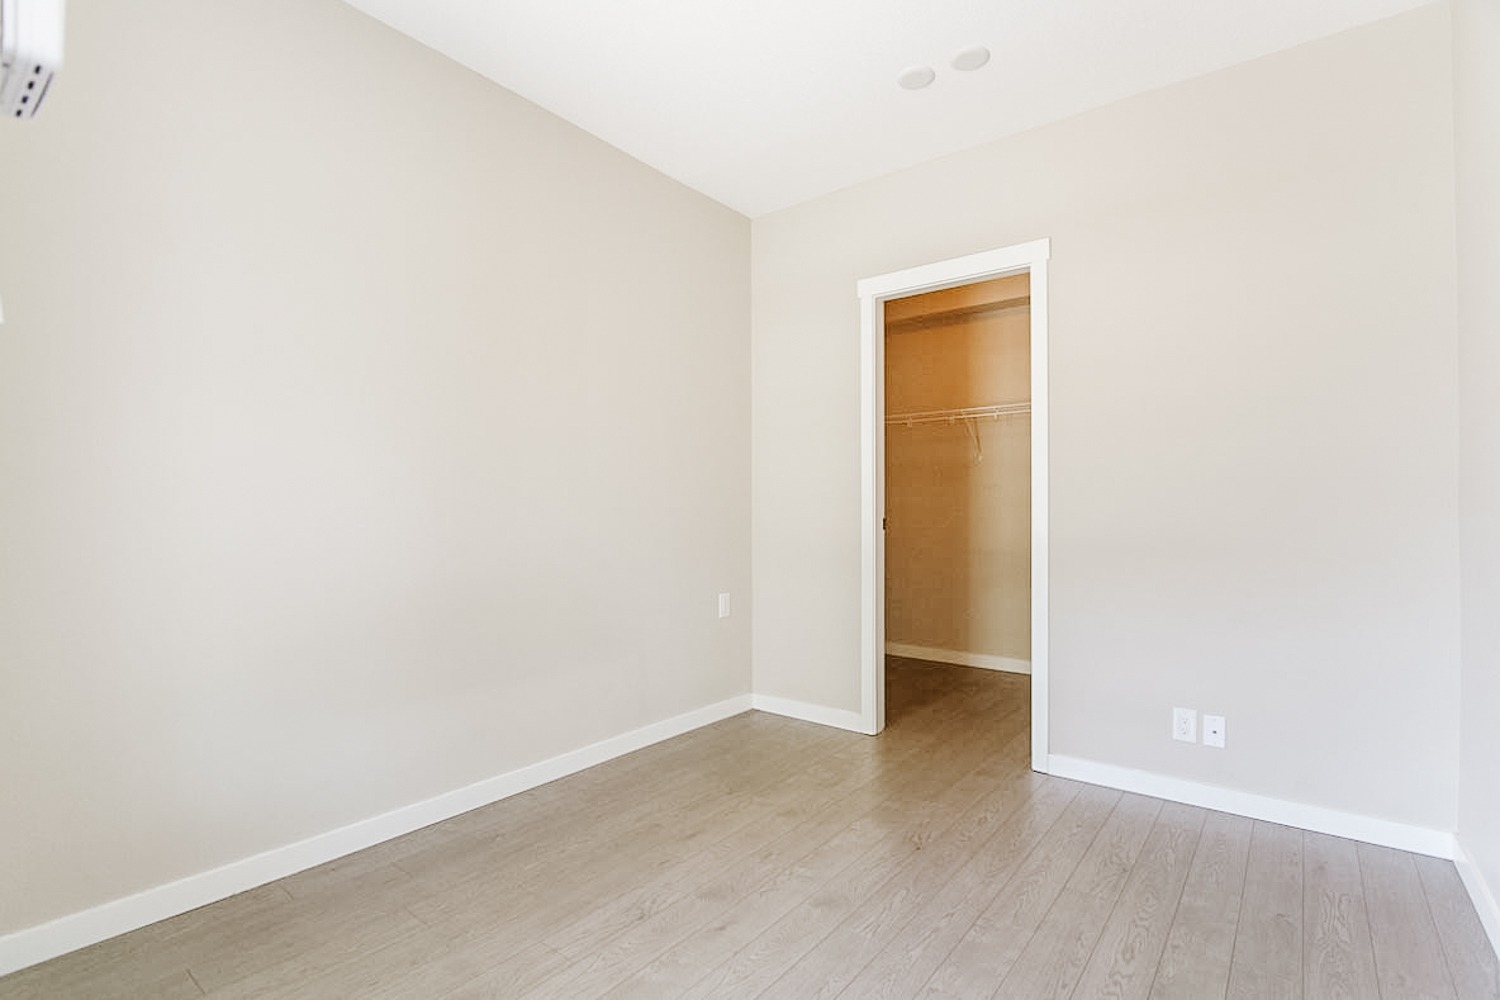 one-bedroom-condo-for-rent-in-lower-lonsdale-north-vancouver-7